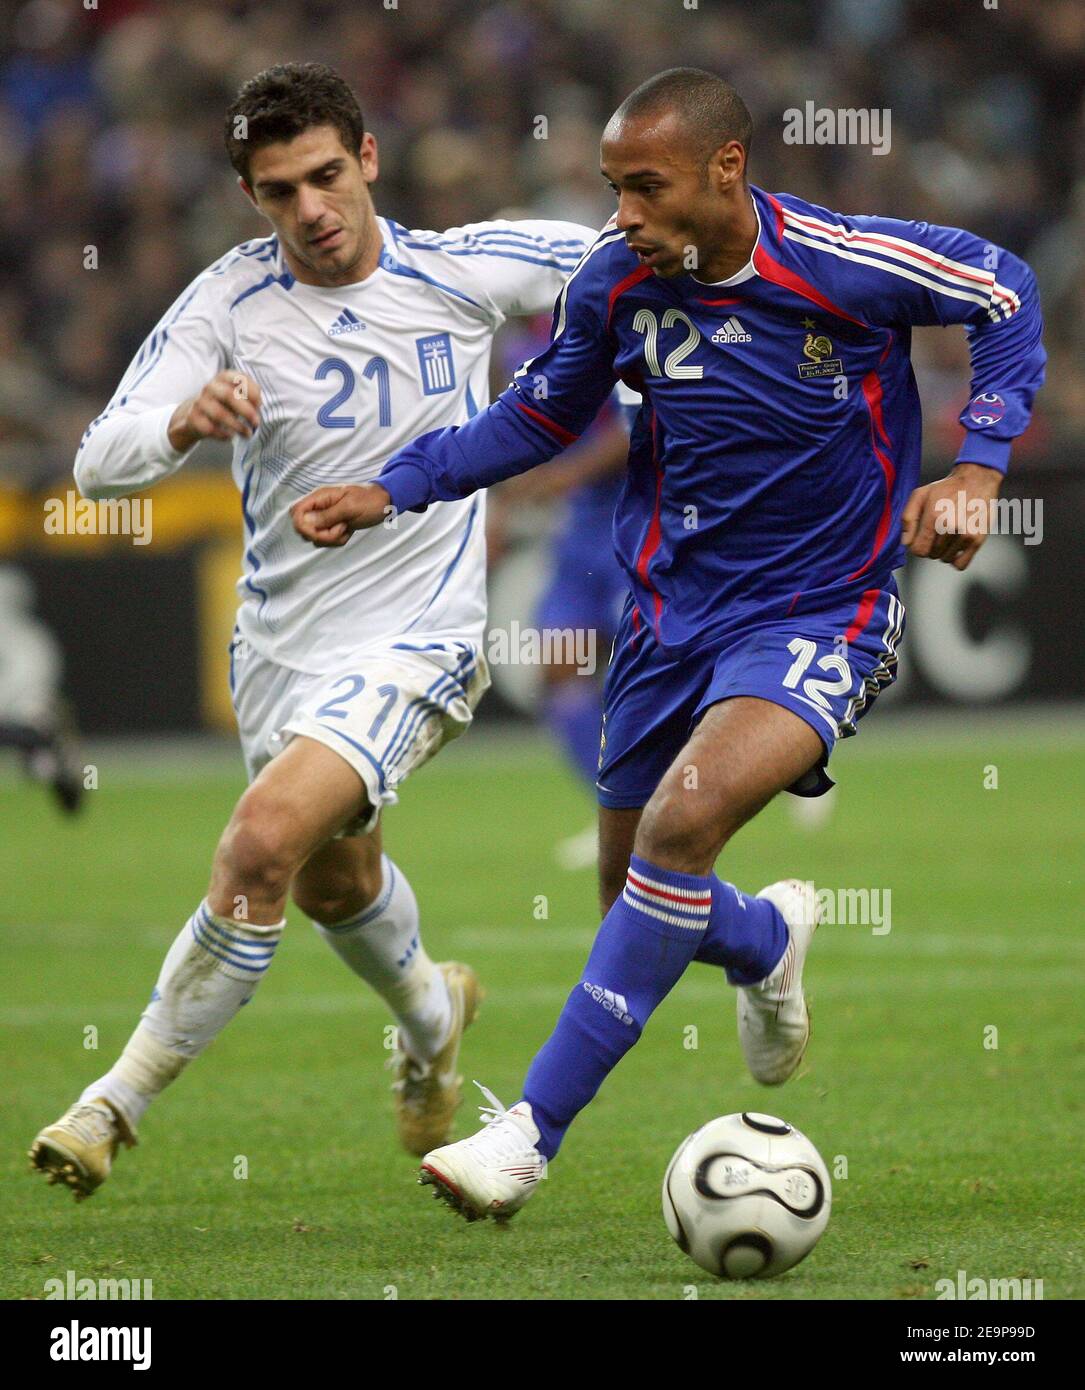 Greece's Konstantinos Katsouranis and France's Thierry Henry battle for the ball during International Friendly match, France vs Greece at the Stade de France, in Paris, France on November 15, 2006. France won 1-0. Photo by Gouhier-Taamallah/Cameleon/ABACAPRESS.COM Stock Photo